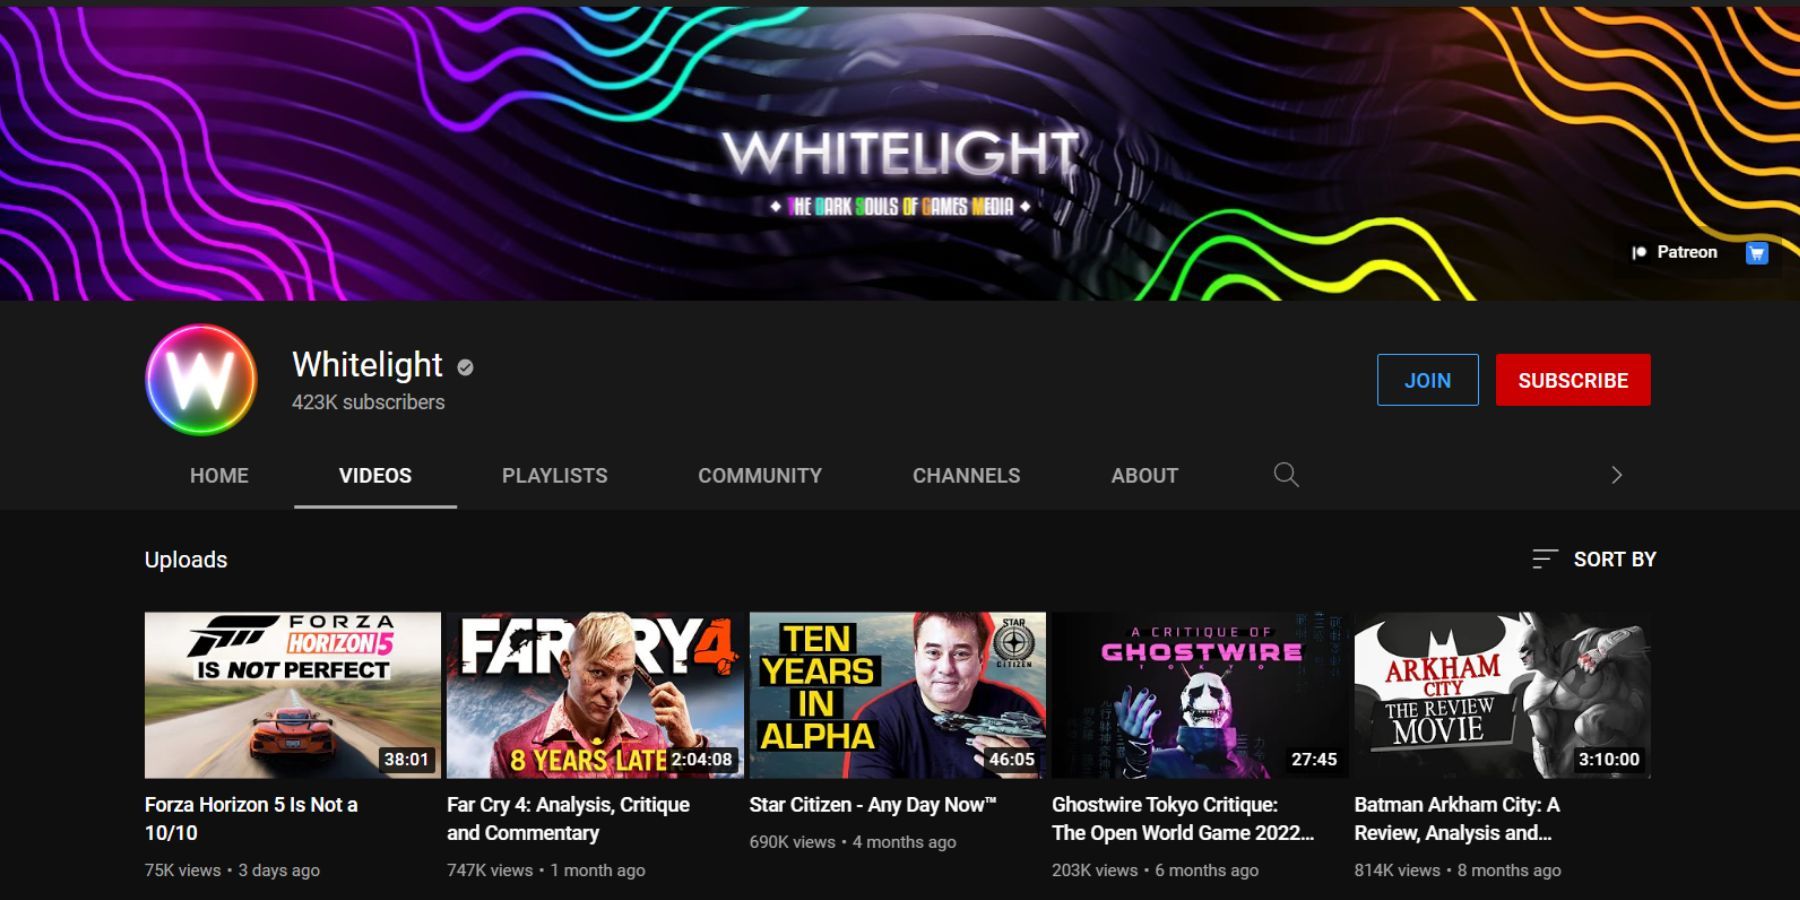 Channel page for Whitelight on Youtube